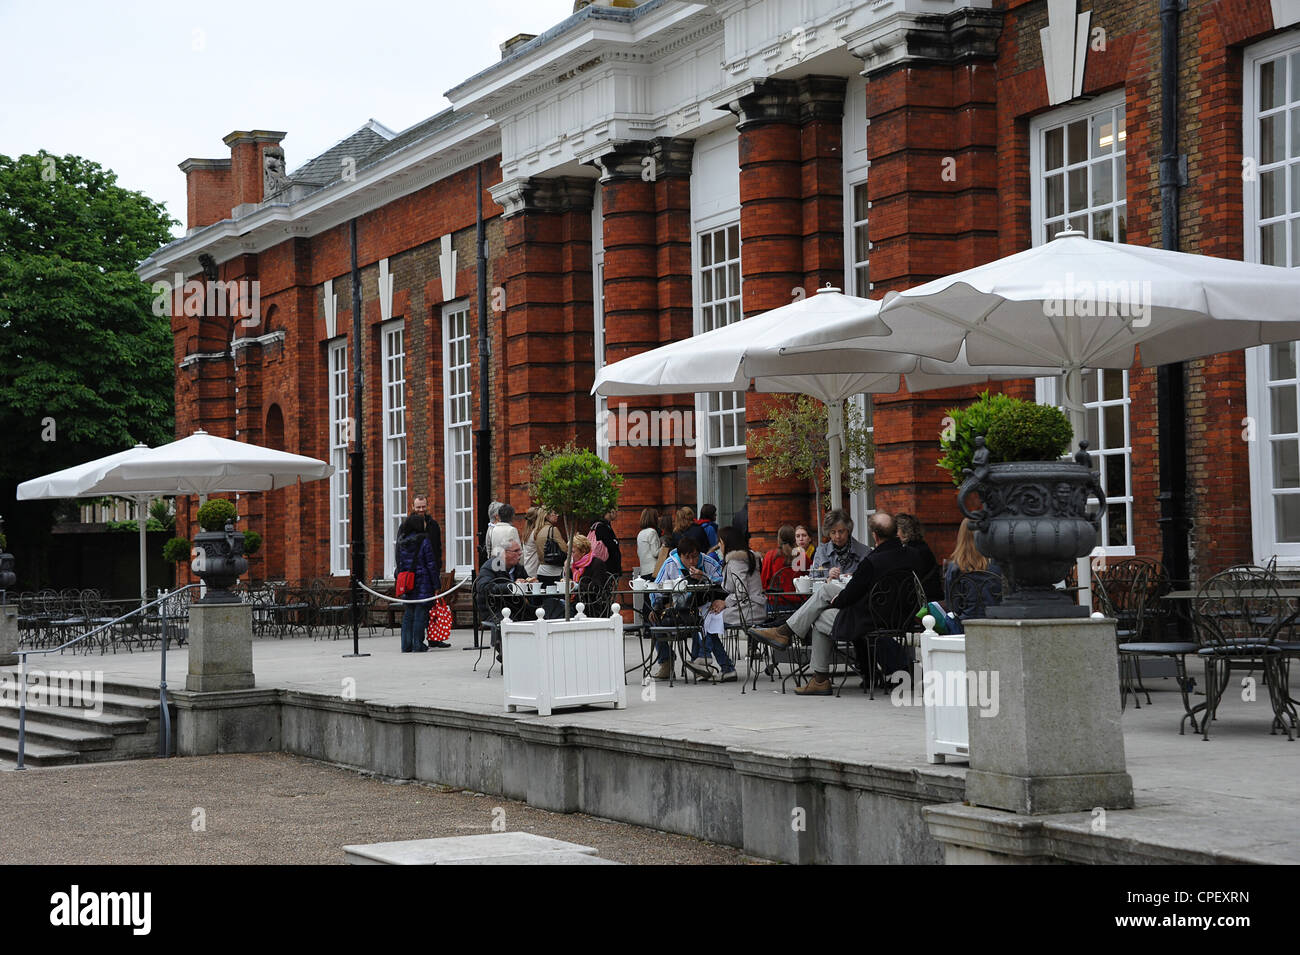 The Orangery in Kensington Gardens in London with customers sitting at tables outside. Stock Photo